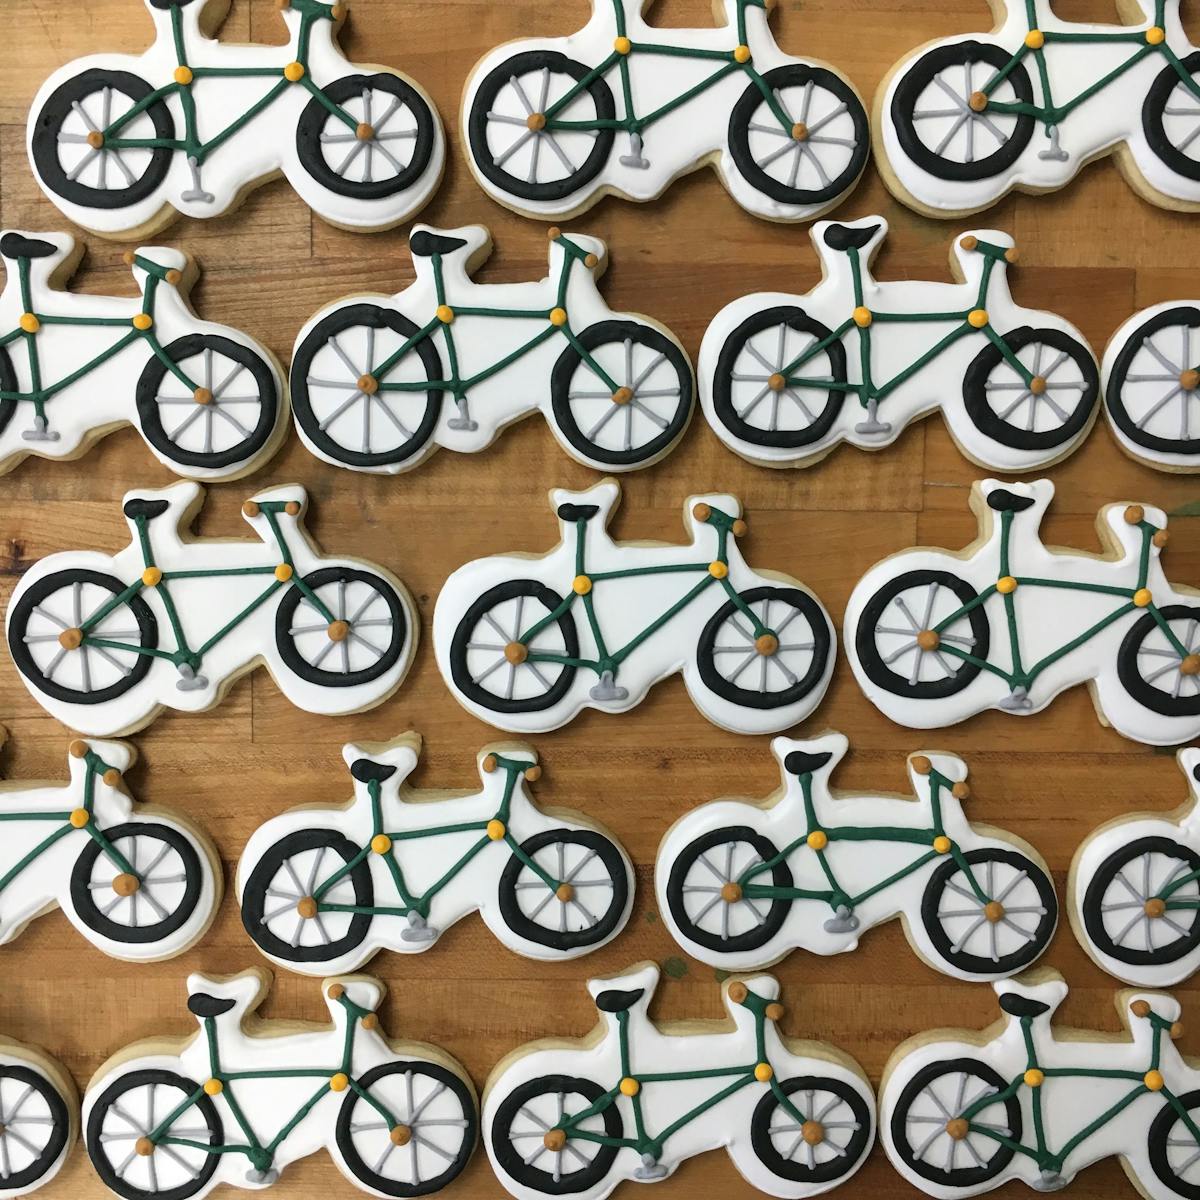 cyclists themed cookies